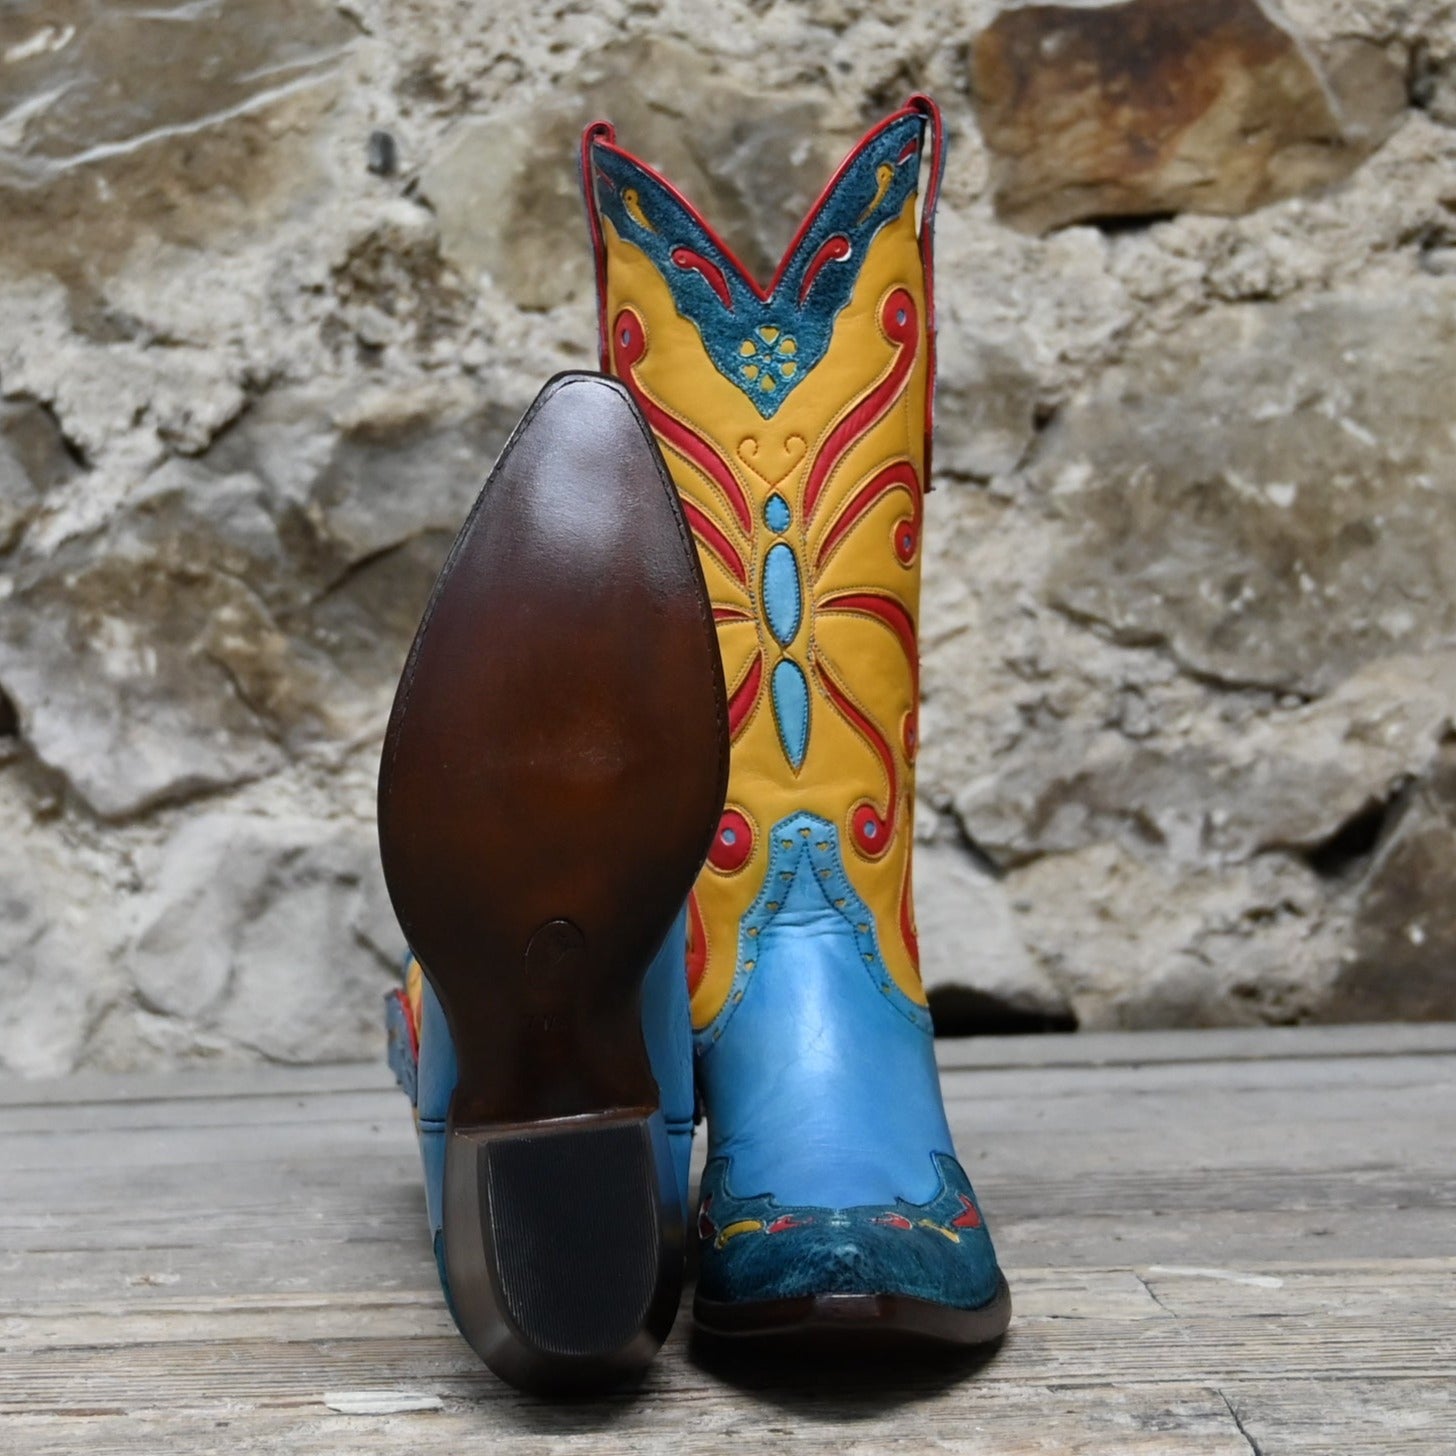 Stallion Ladies Deco Butterfly Boot W/Banana Glove Calf Inlays Foxing and Wingtip. view of bottom